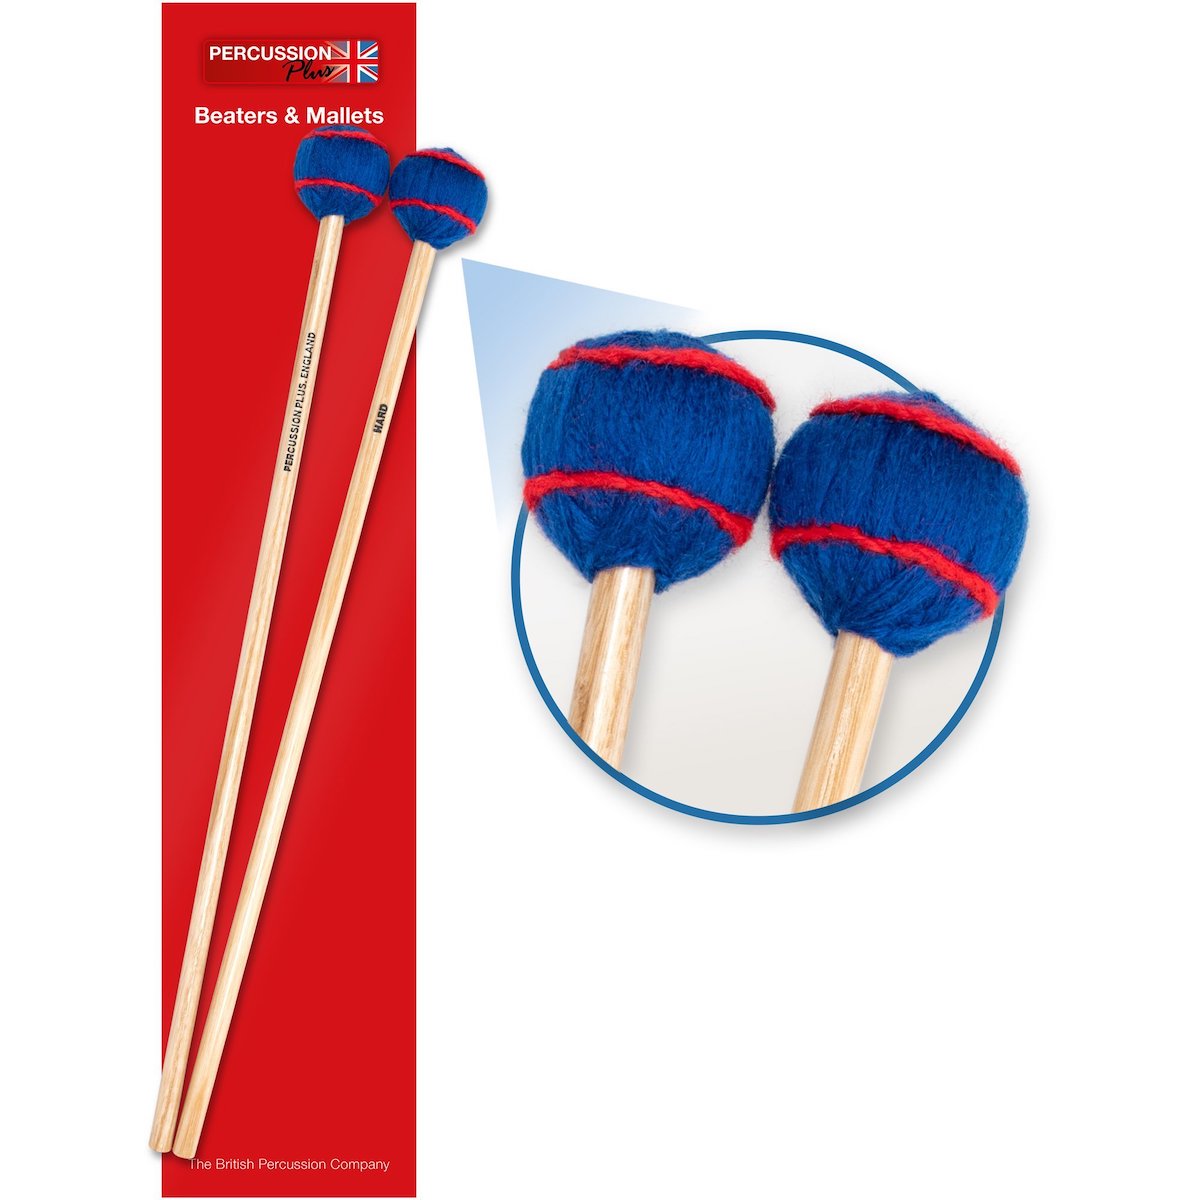 Percussion Plus Pair of Mallets - Hard